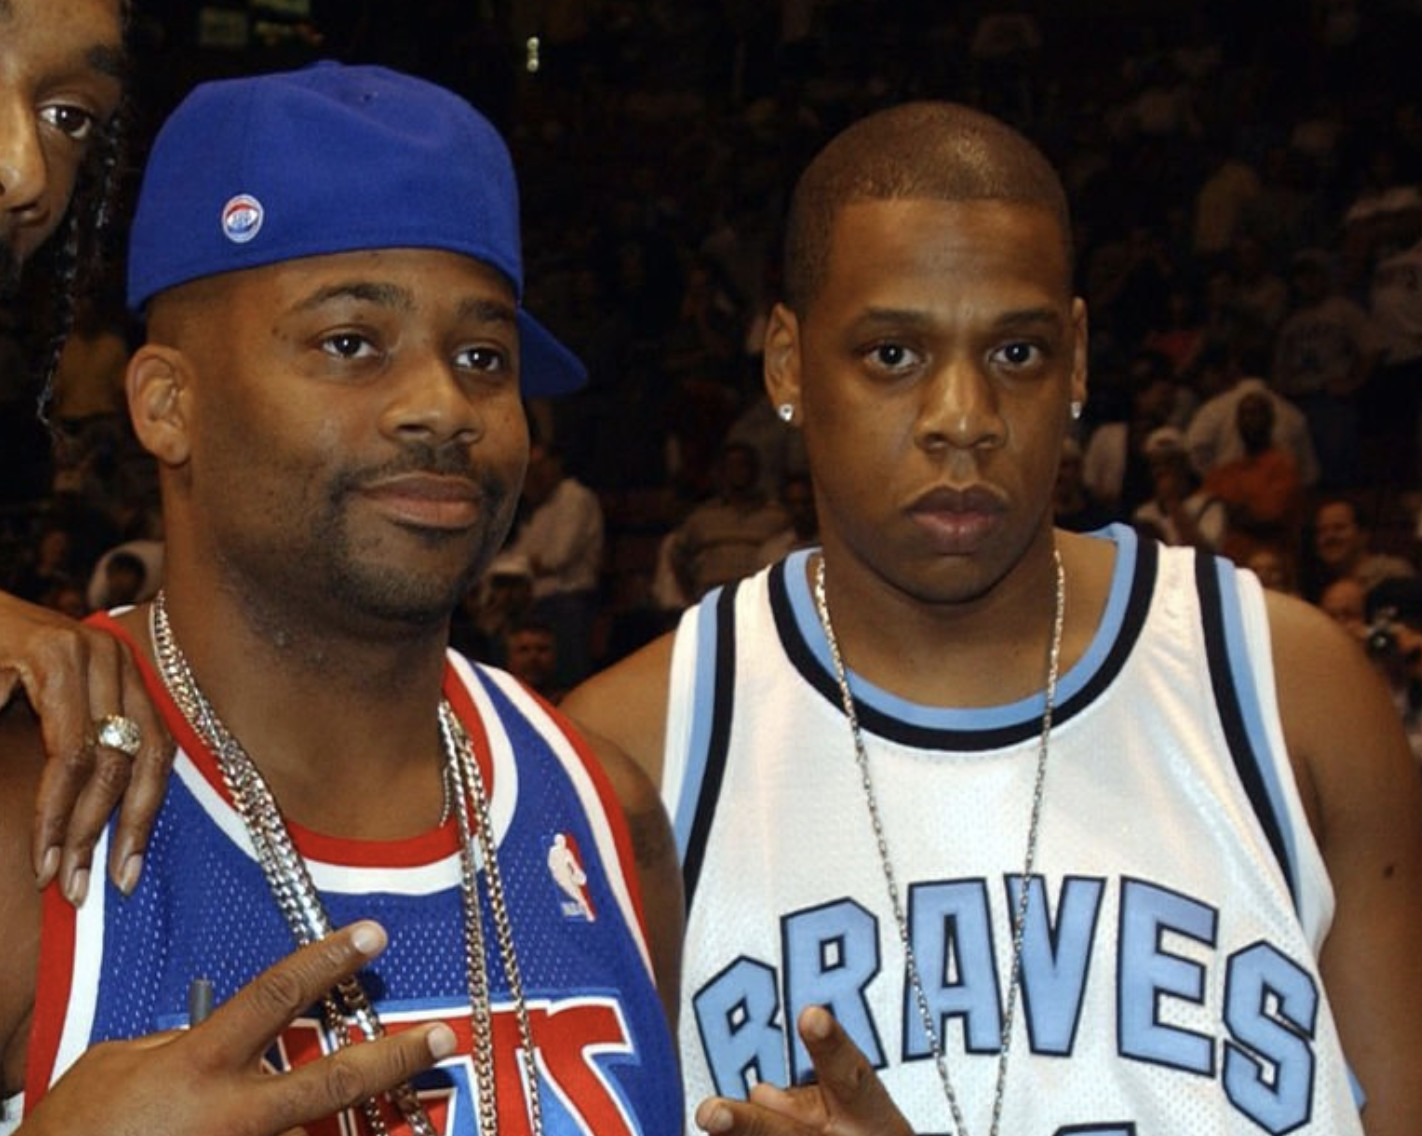 Dame Dash Says Jay-Z Betrayed [Him] For Money: Some Real Slick